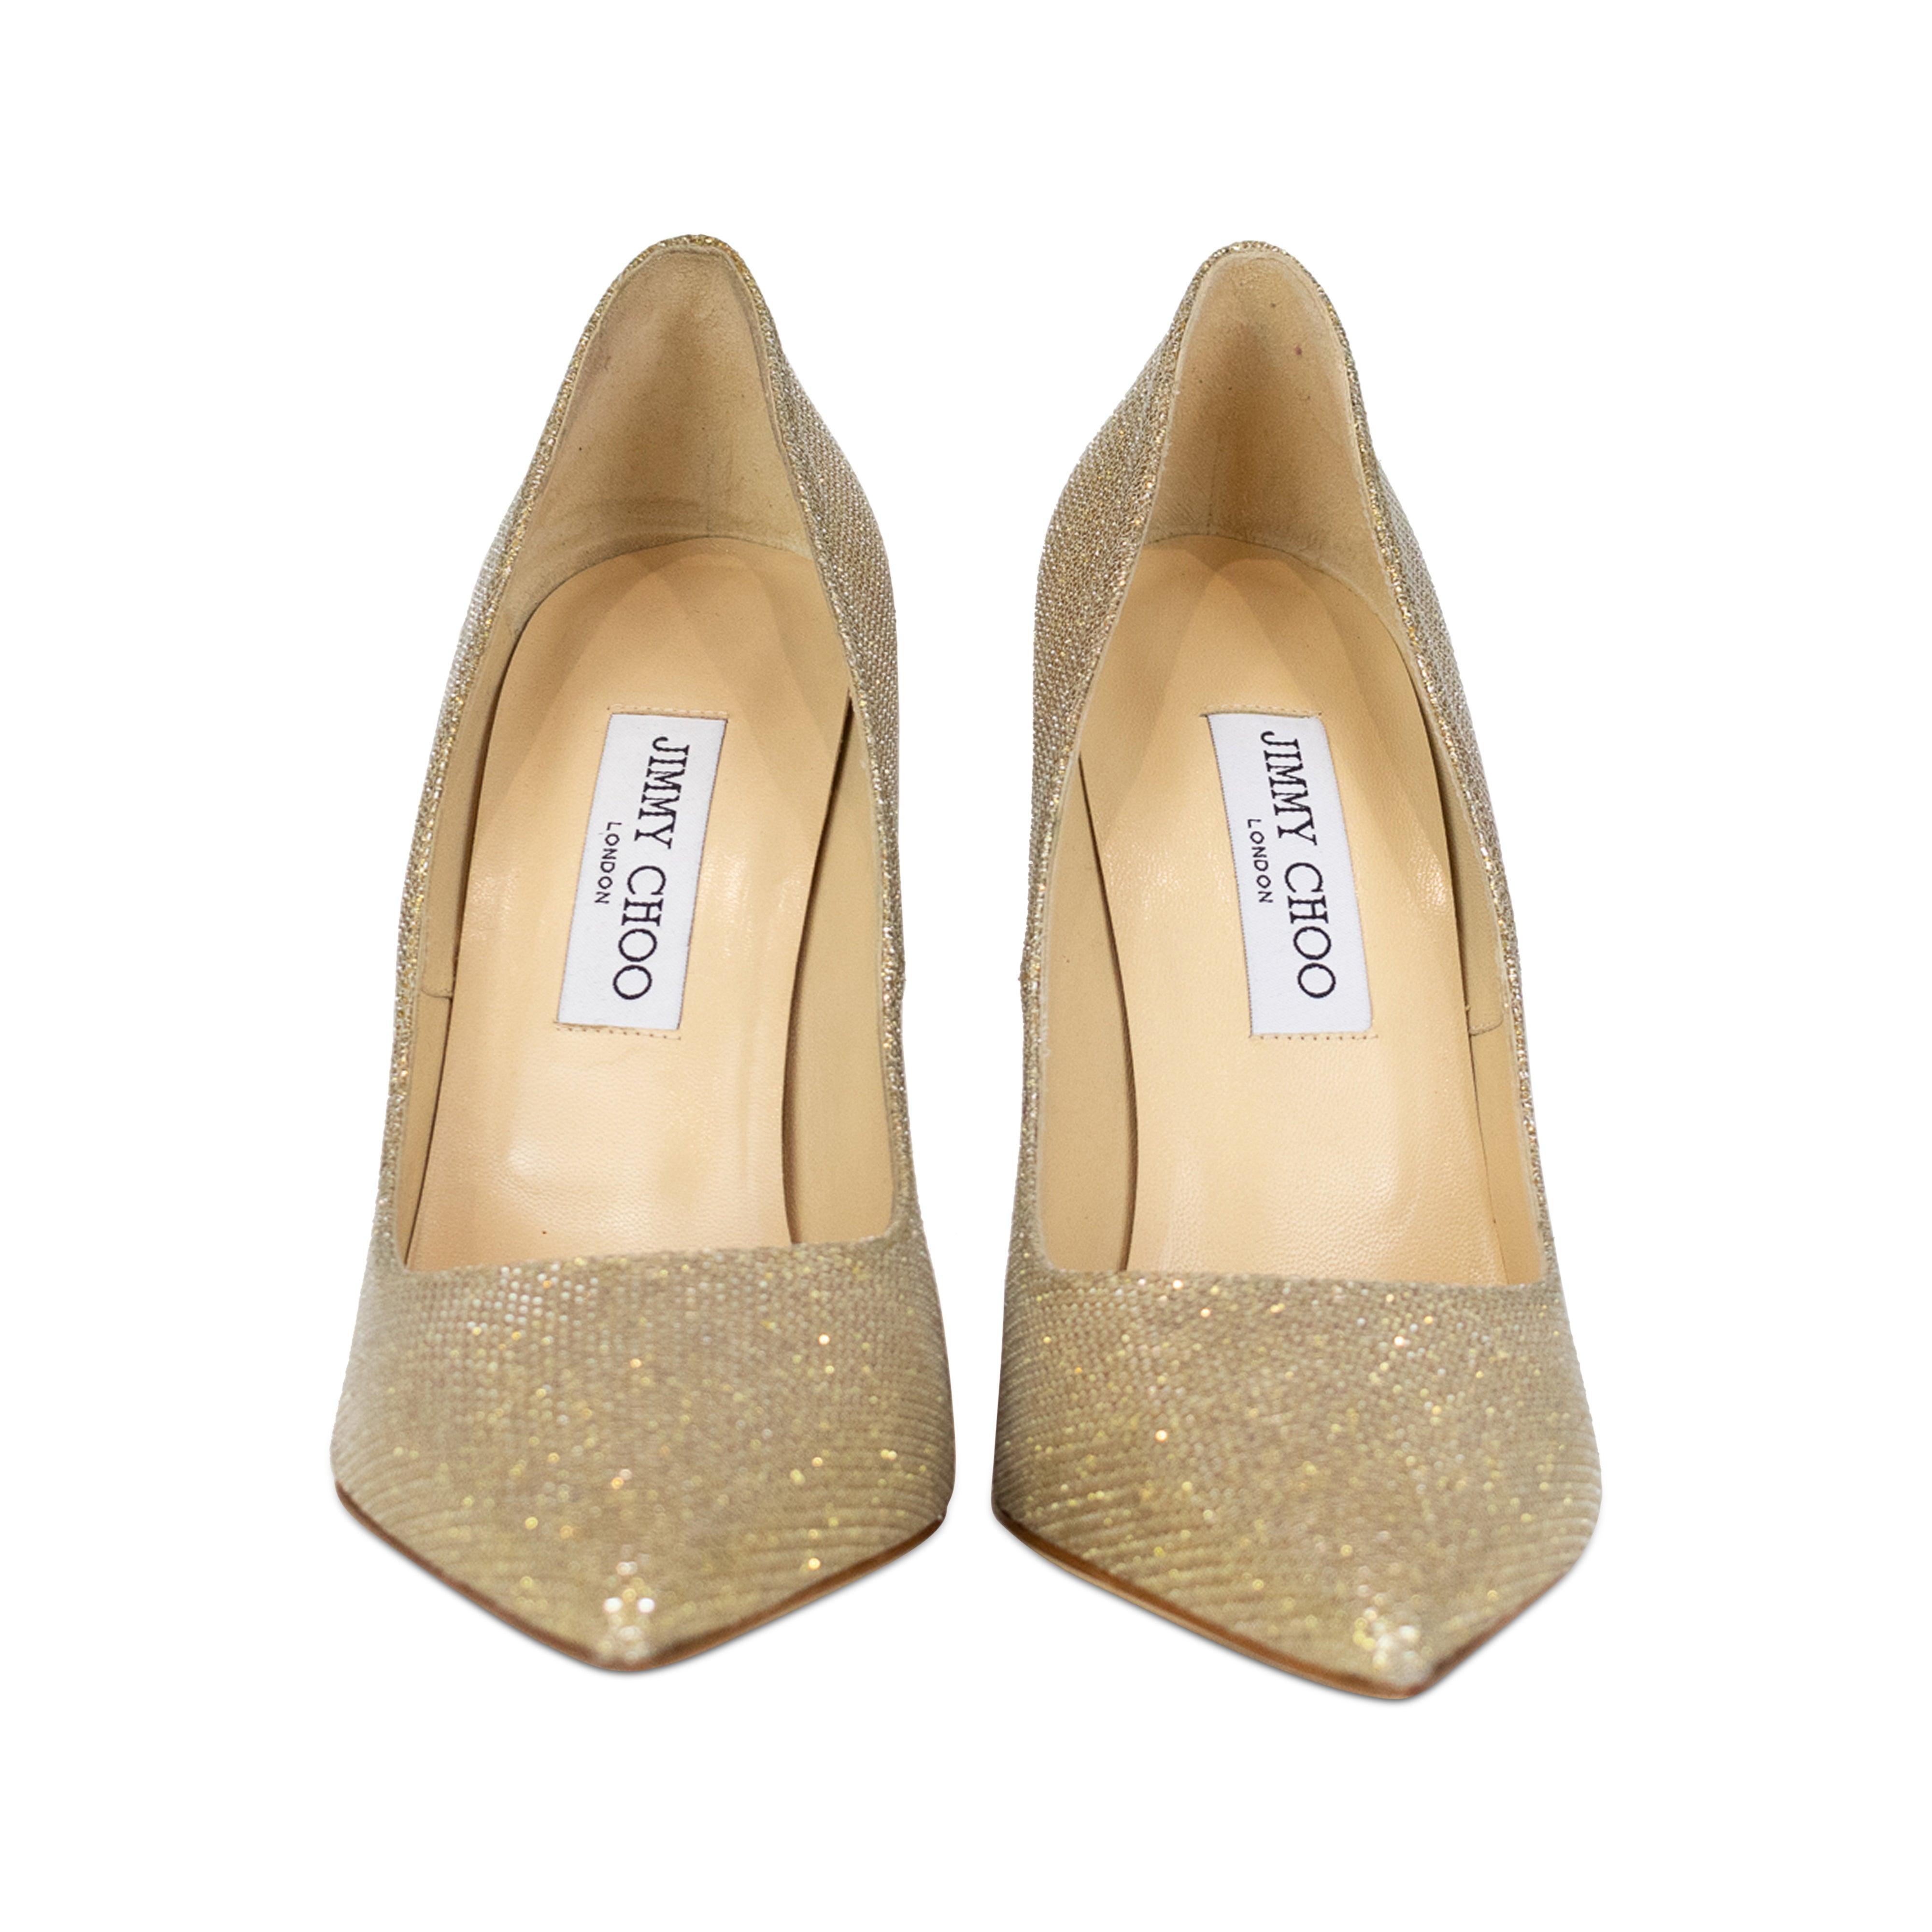 Jimmy Choo 'Anouk' Pumps - 39.5 - Fashionably Yours